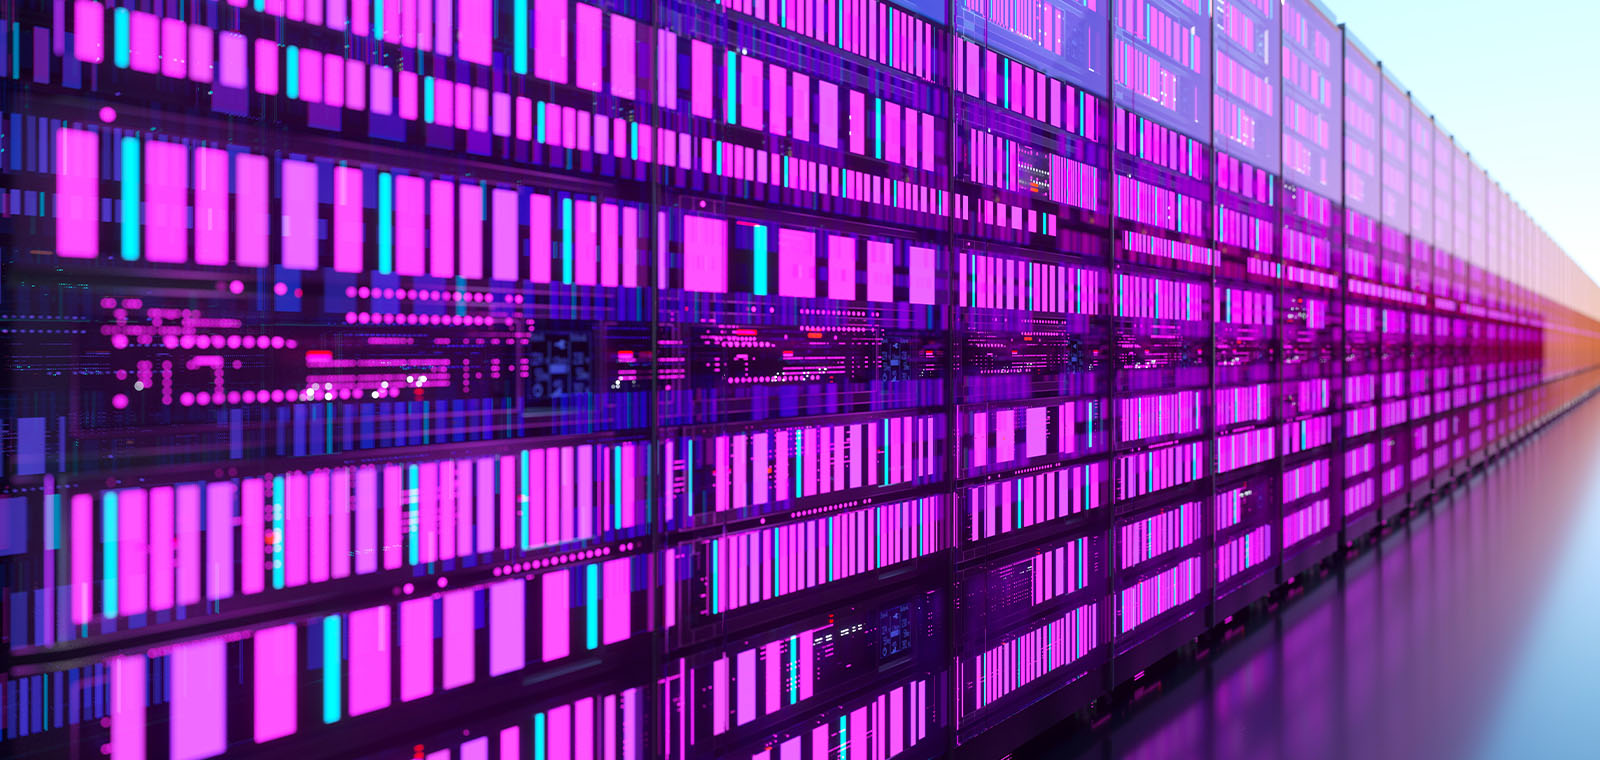 Glowing bright pinkish panels light up a long server room. 